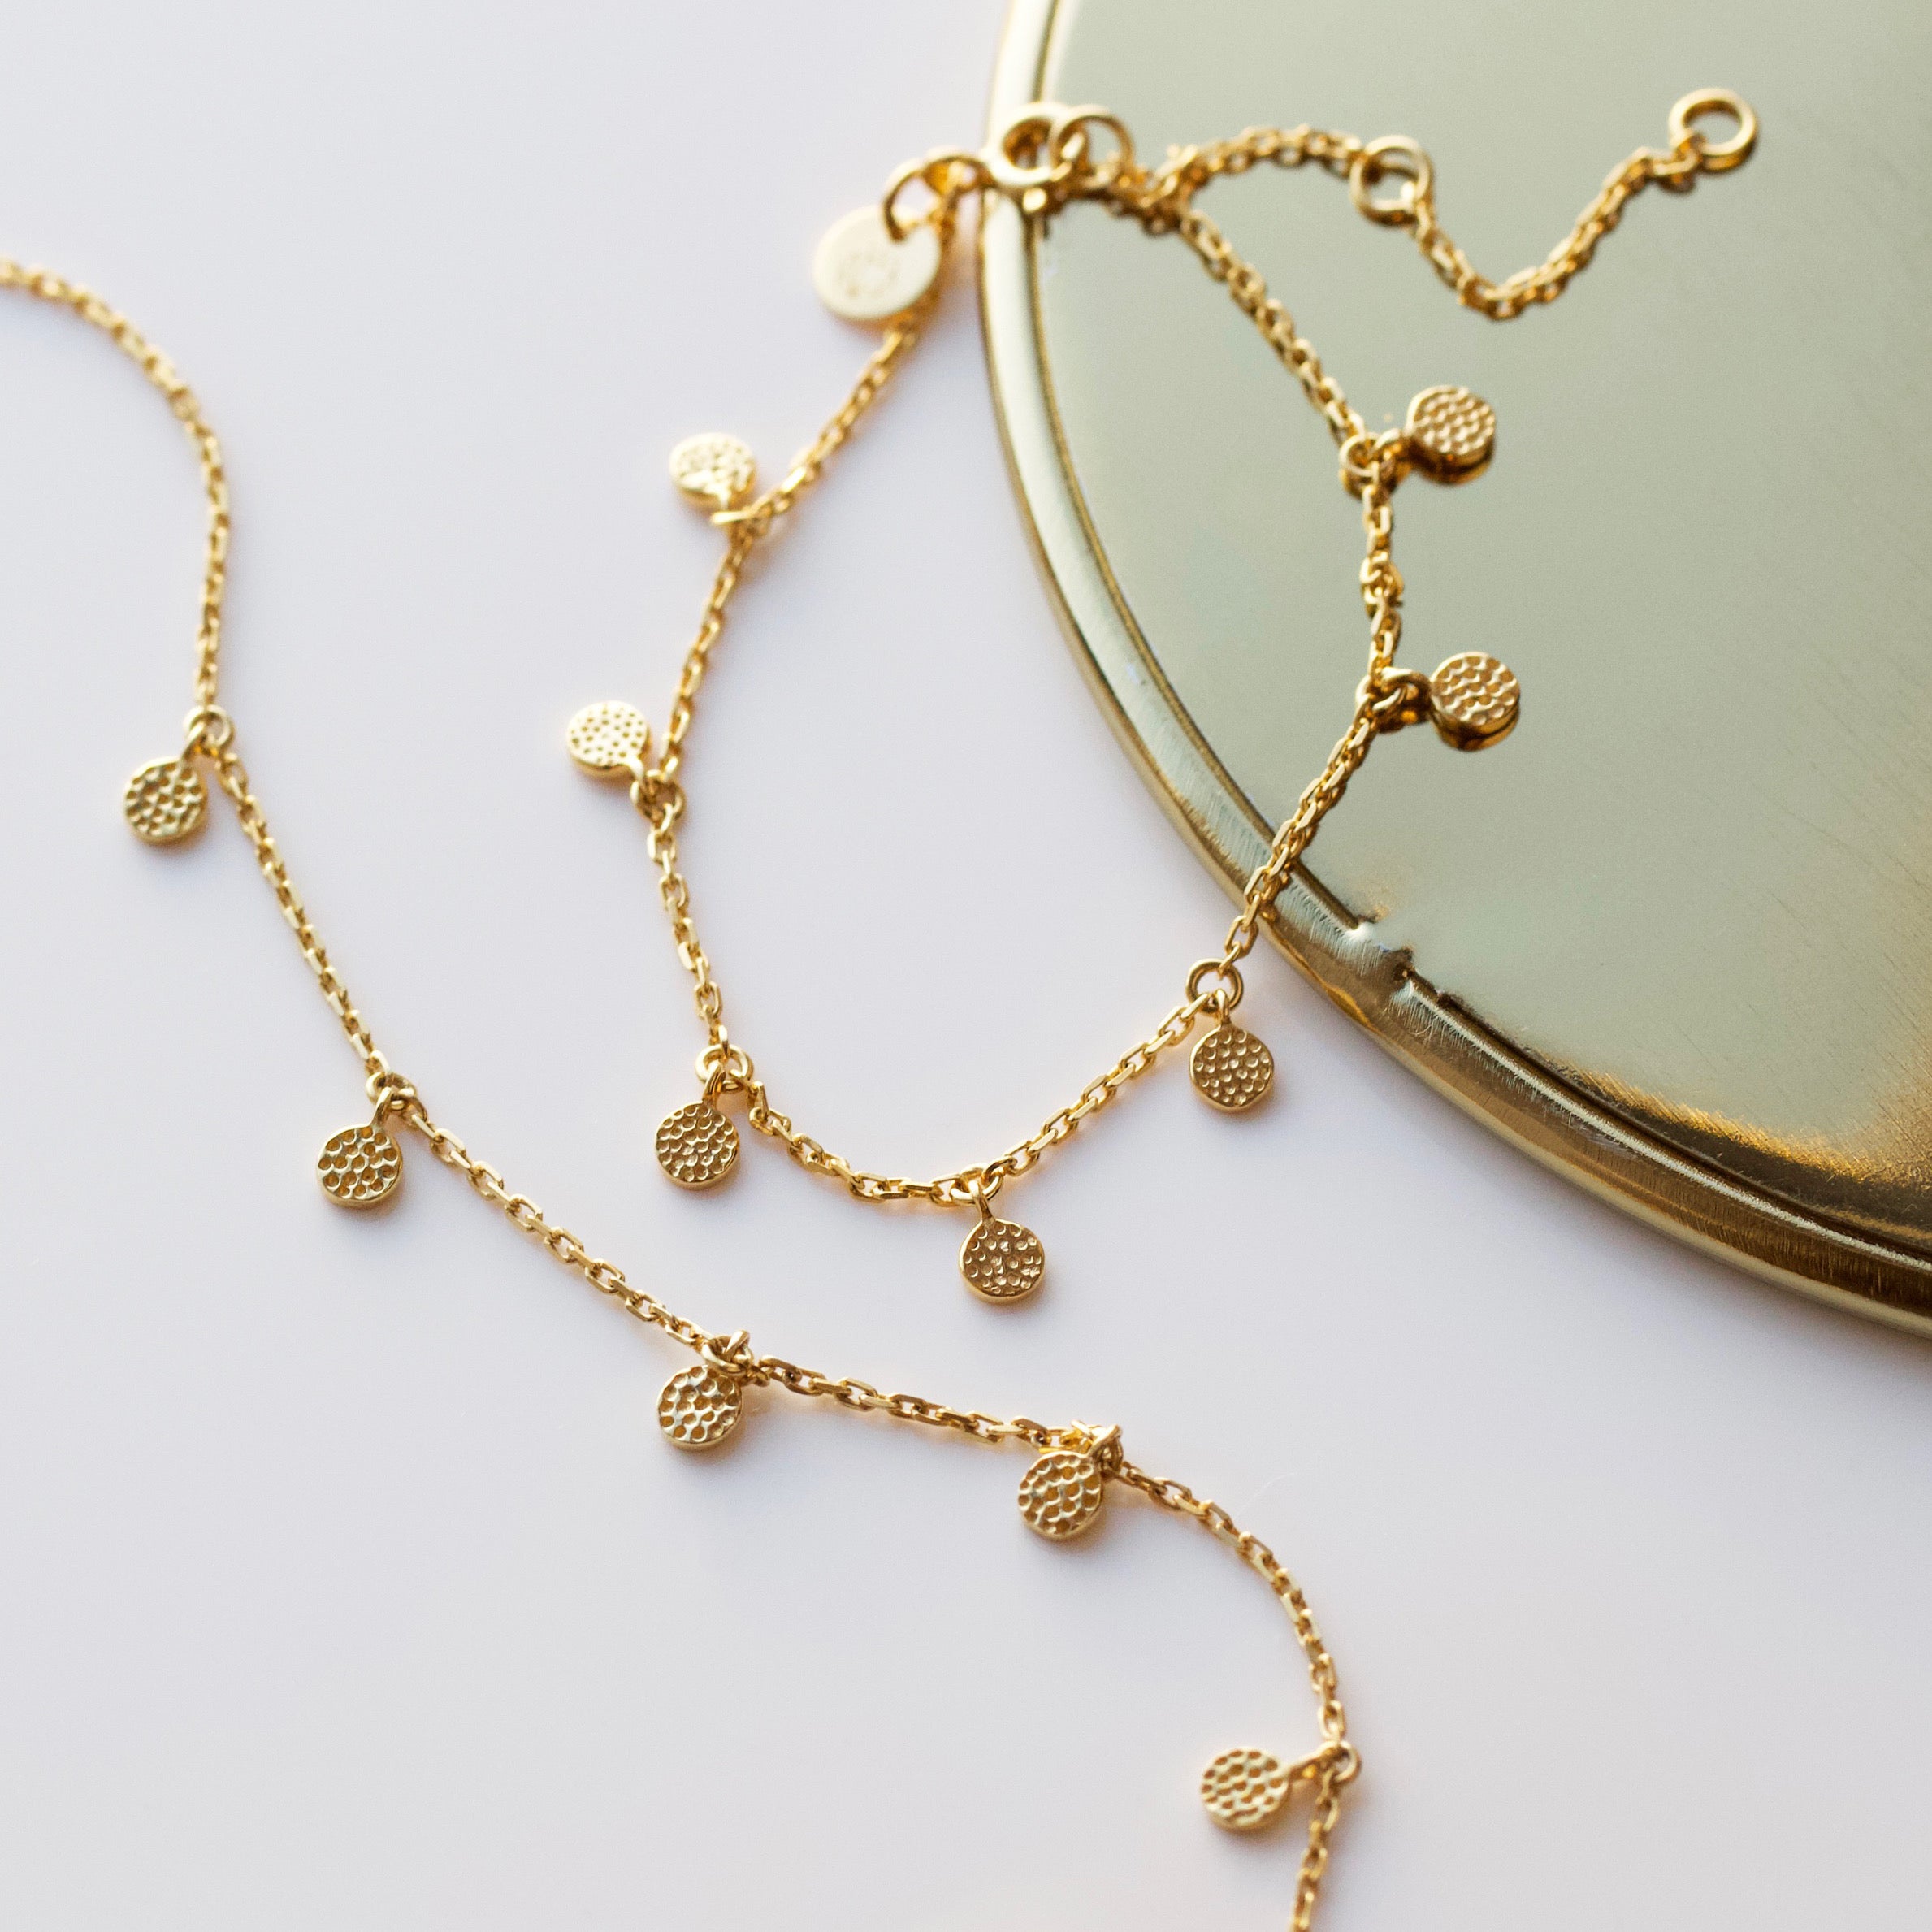 hanging coin necklace and bracelet set in gold